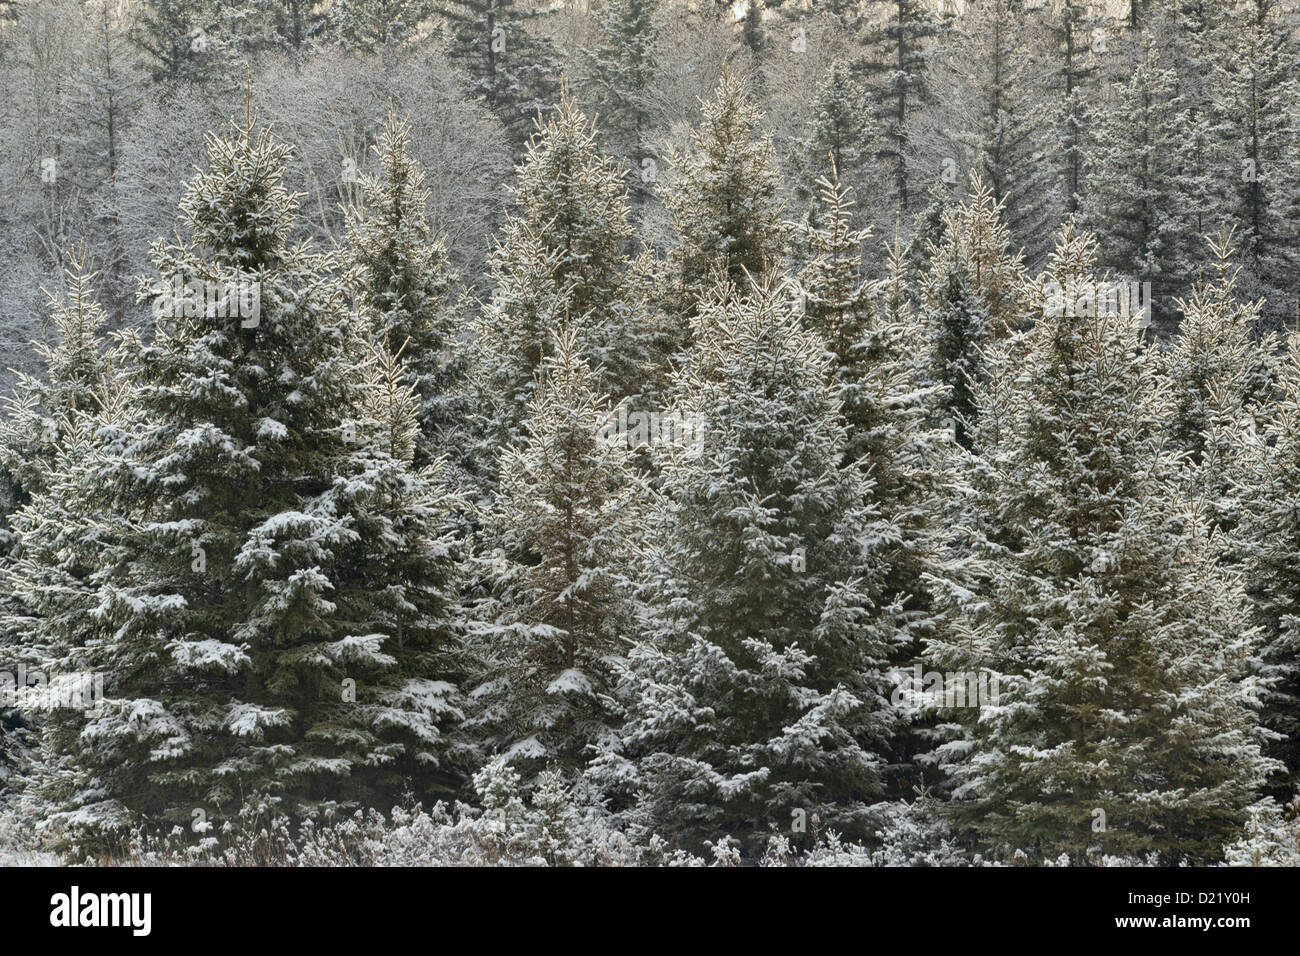 White spruce grove (Picea glauca) with a dusting of fresh snow, Greater Sudbury, Ontario, Canada Stock Photo